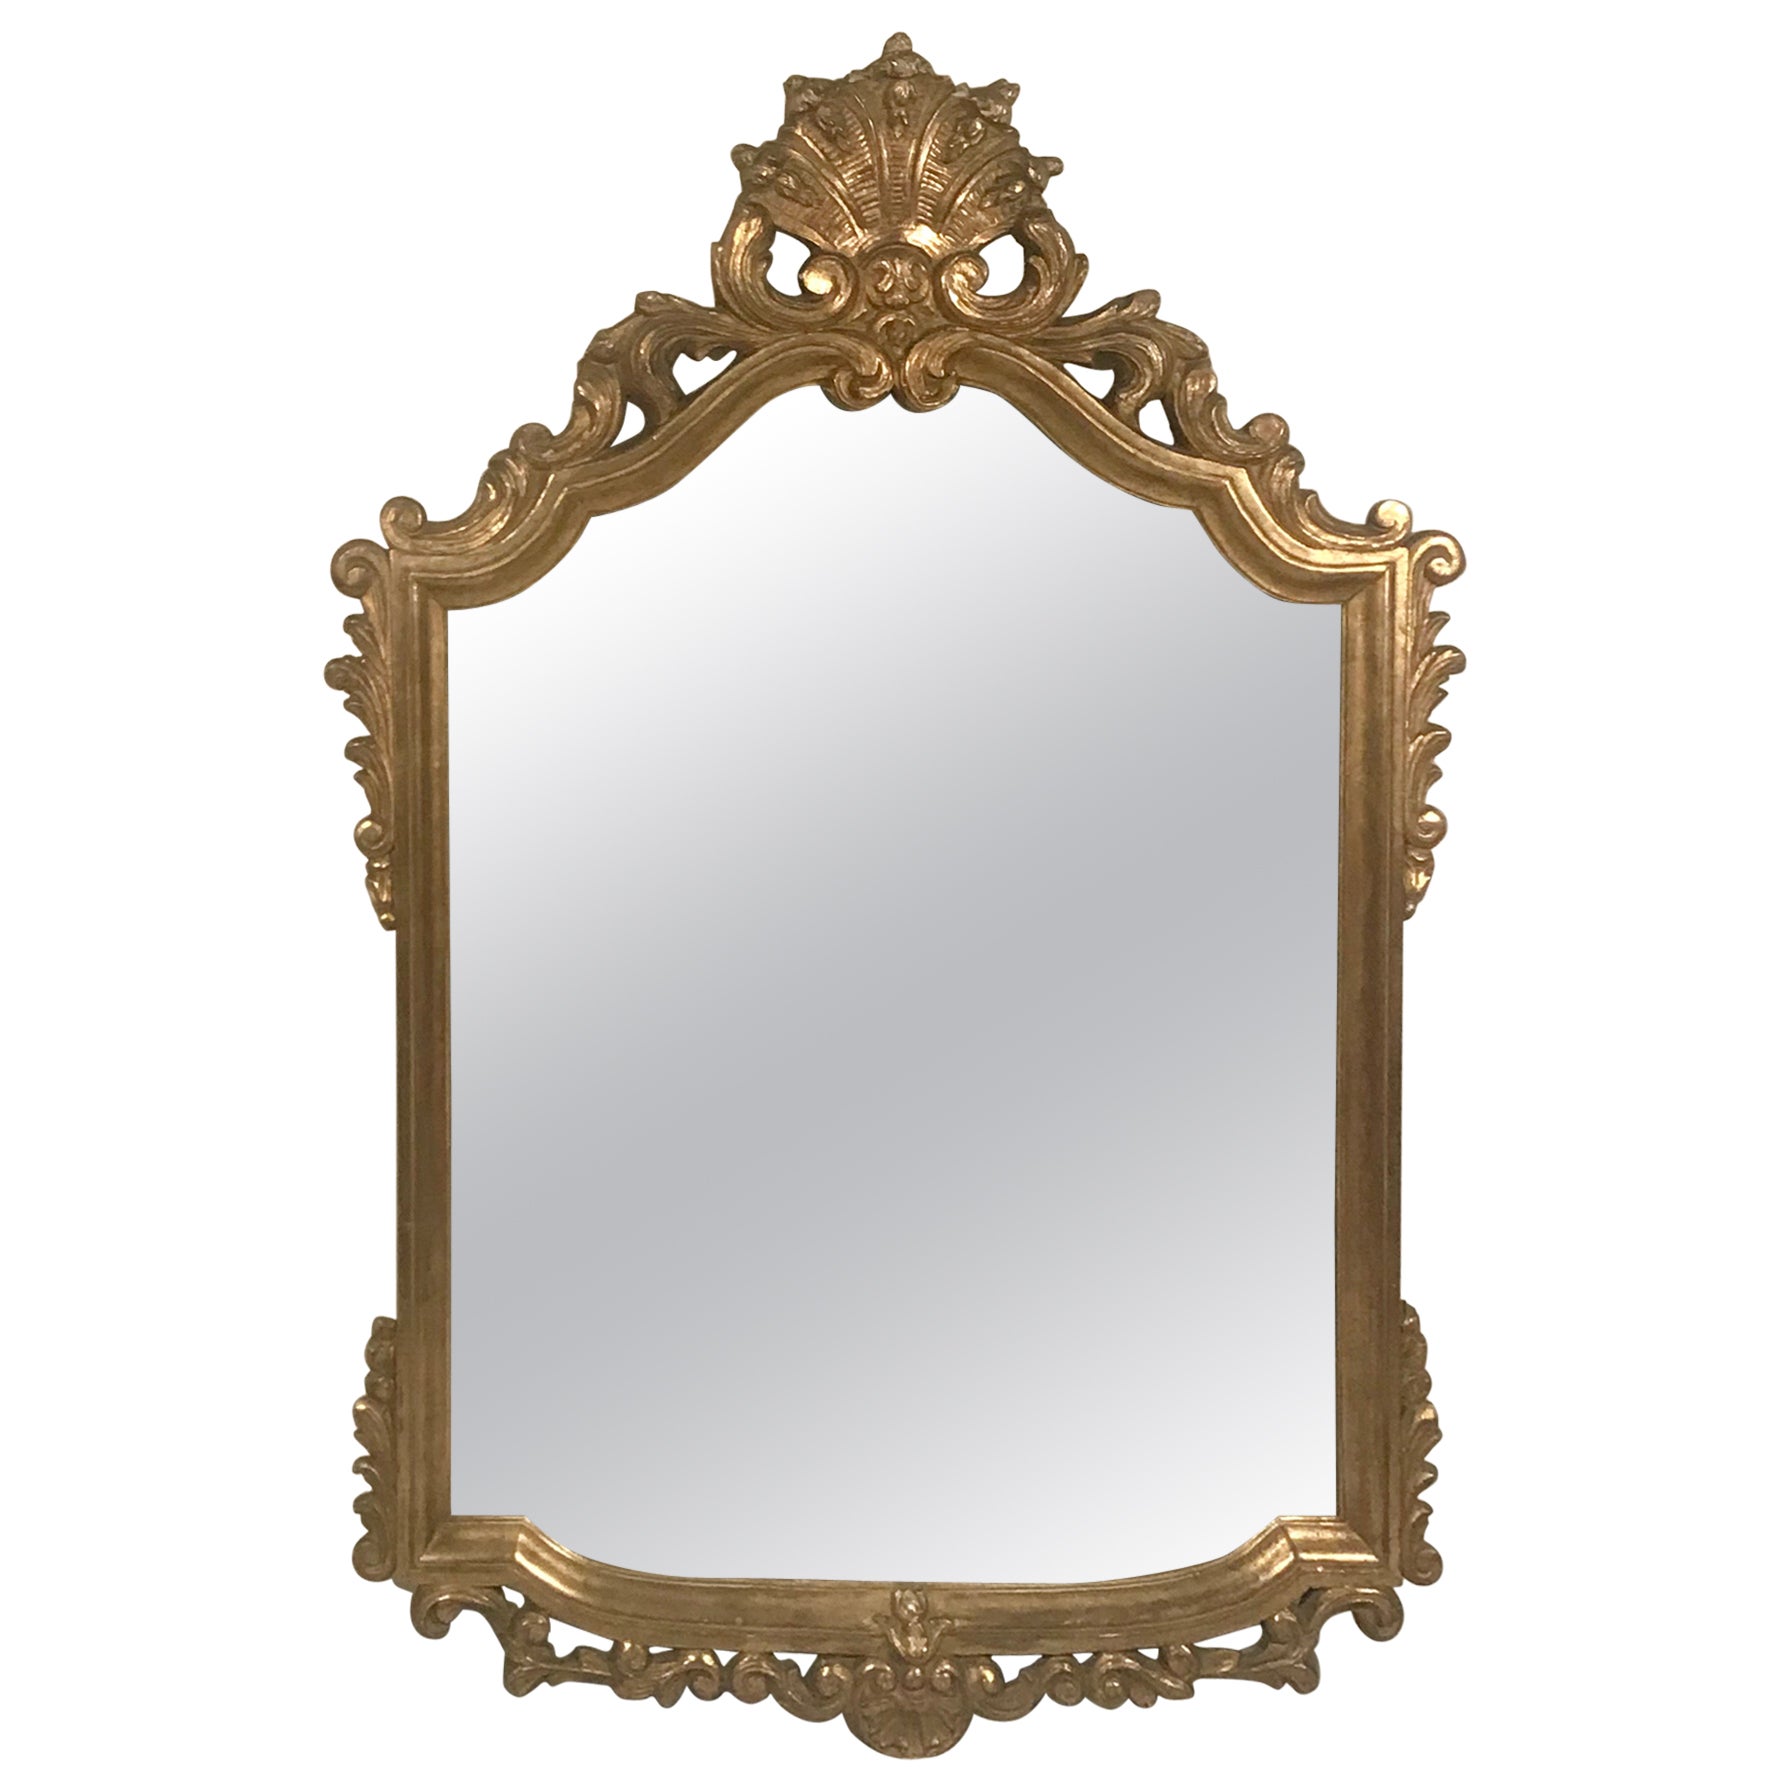 French Baroque Mirror, 19th century, Giltwood